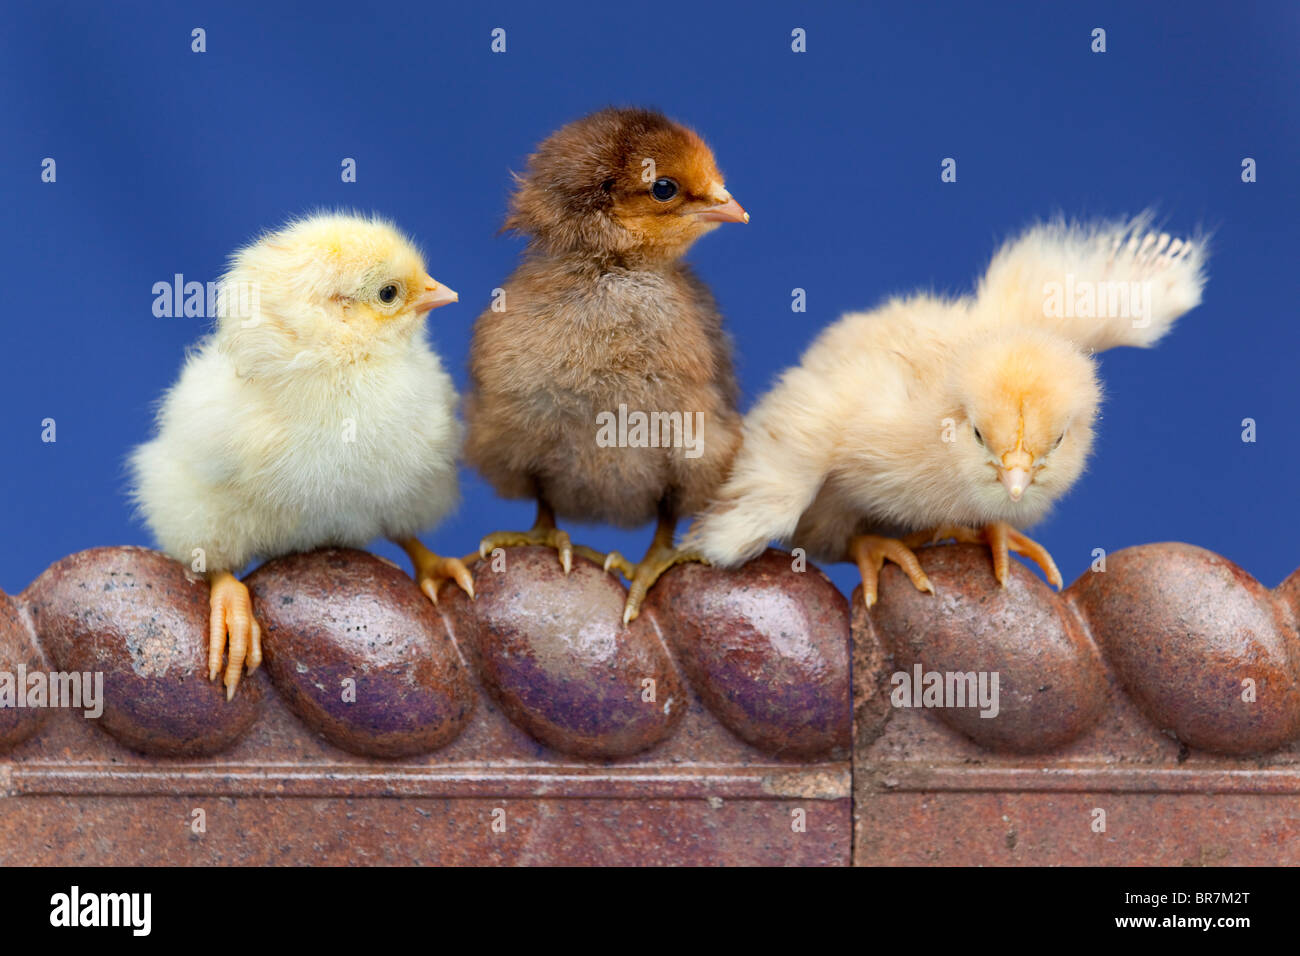 Chicks on the edge of a tile Stock Photo